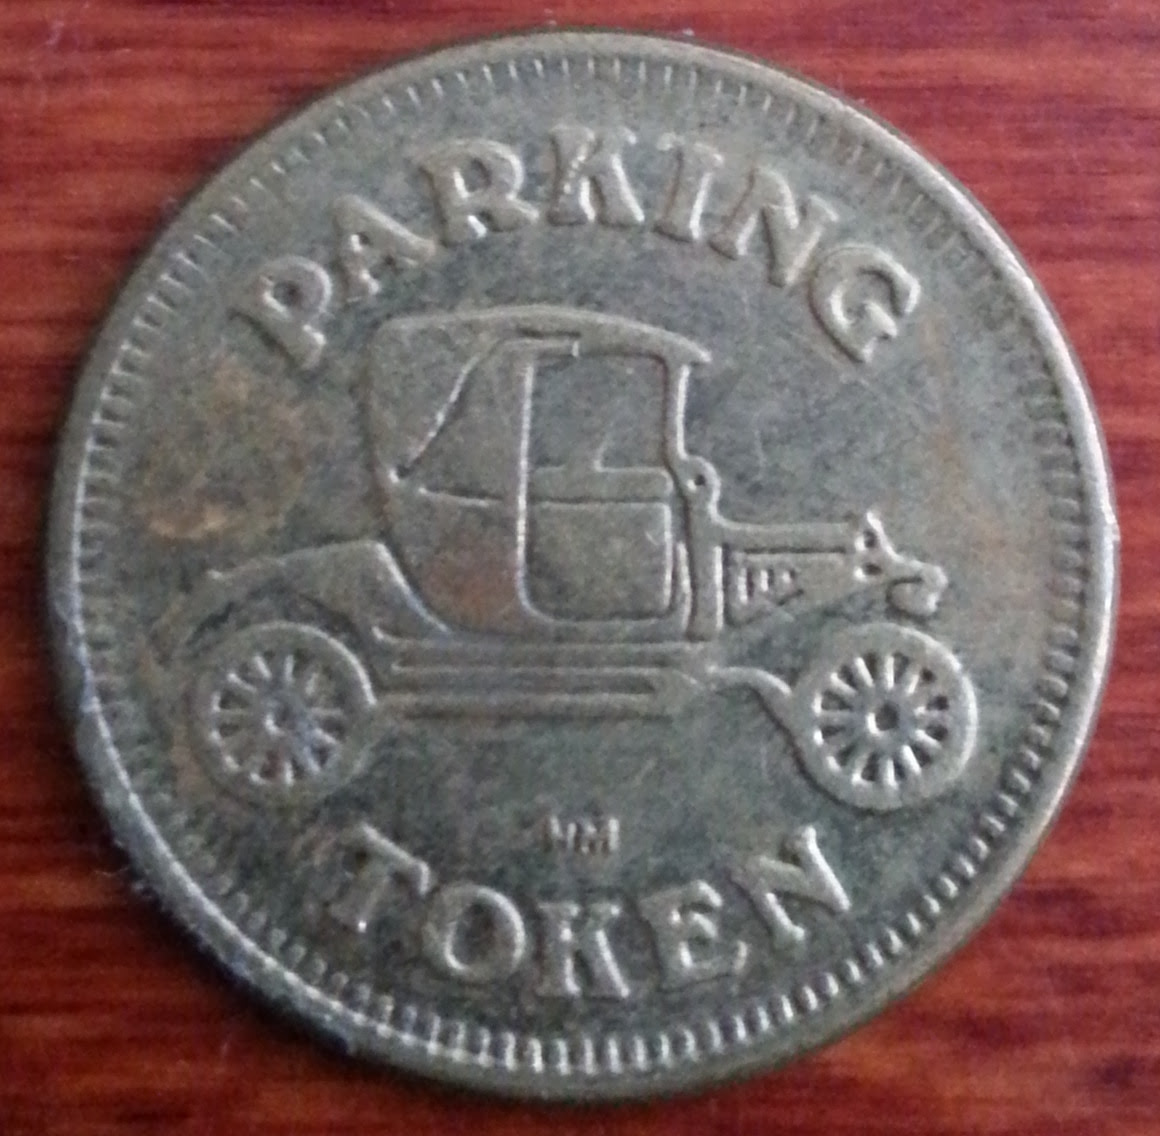 Parking Token Coin Value Hey Guys Apologies If This Is The ...